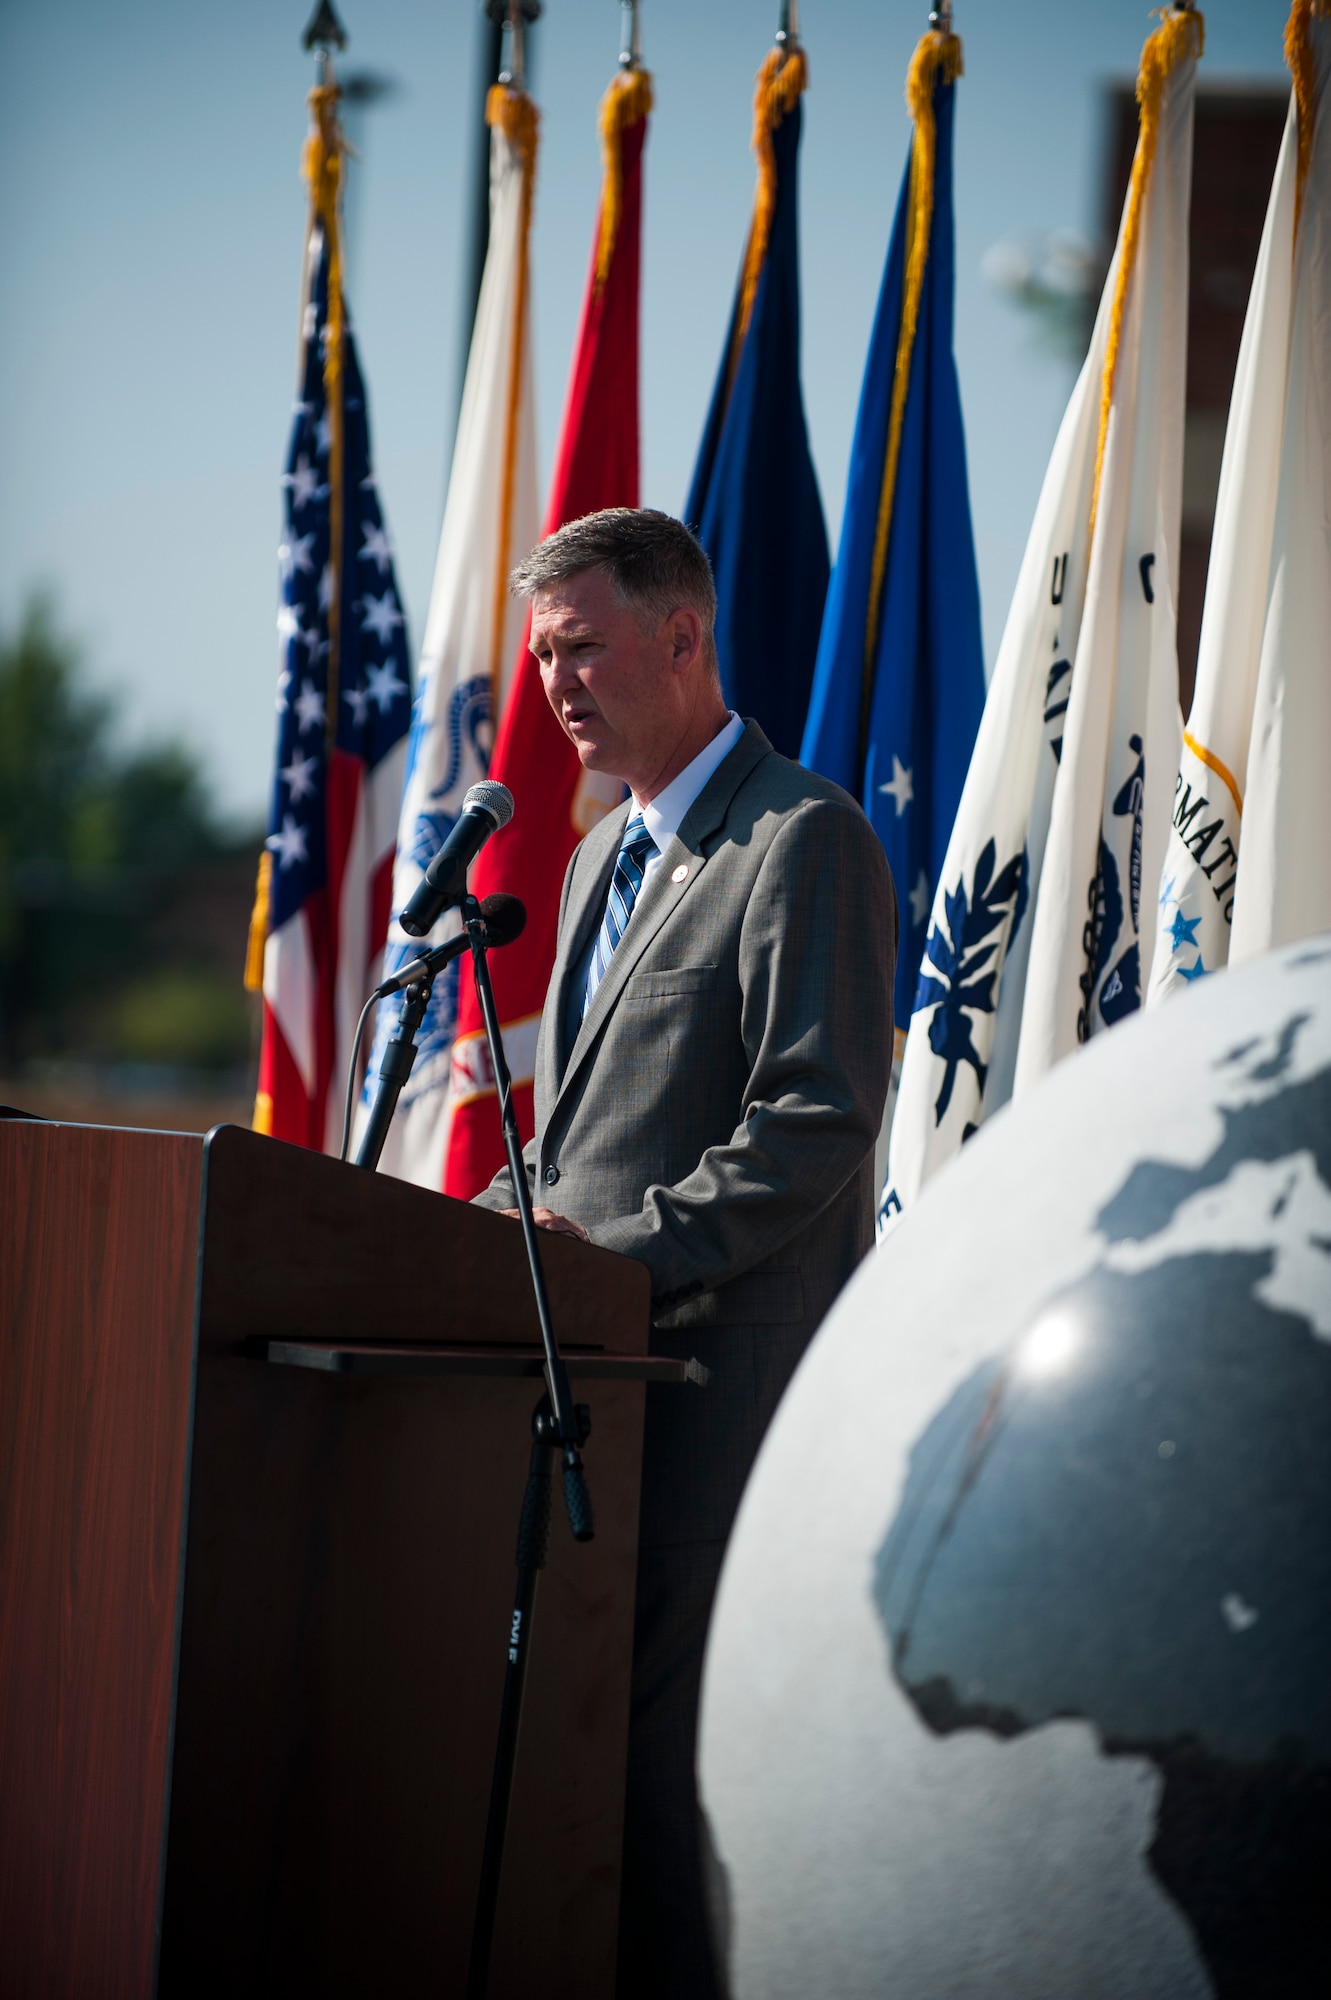 Dana Rowe, Defense Information Systems Agency Global Operations Command deputy commander, introduces distinguished visitors during the ribbon cutting ceremony for the new DISA compound at Scott Air Force Base, Ill., Aug. 11, 2016. The $100 million facility was completed on time and under budget. (U.S. Air Force photo by Staff Sgt. Clayton Lenhardt/Released)